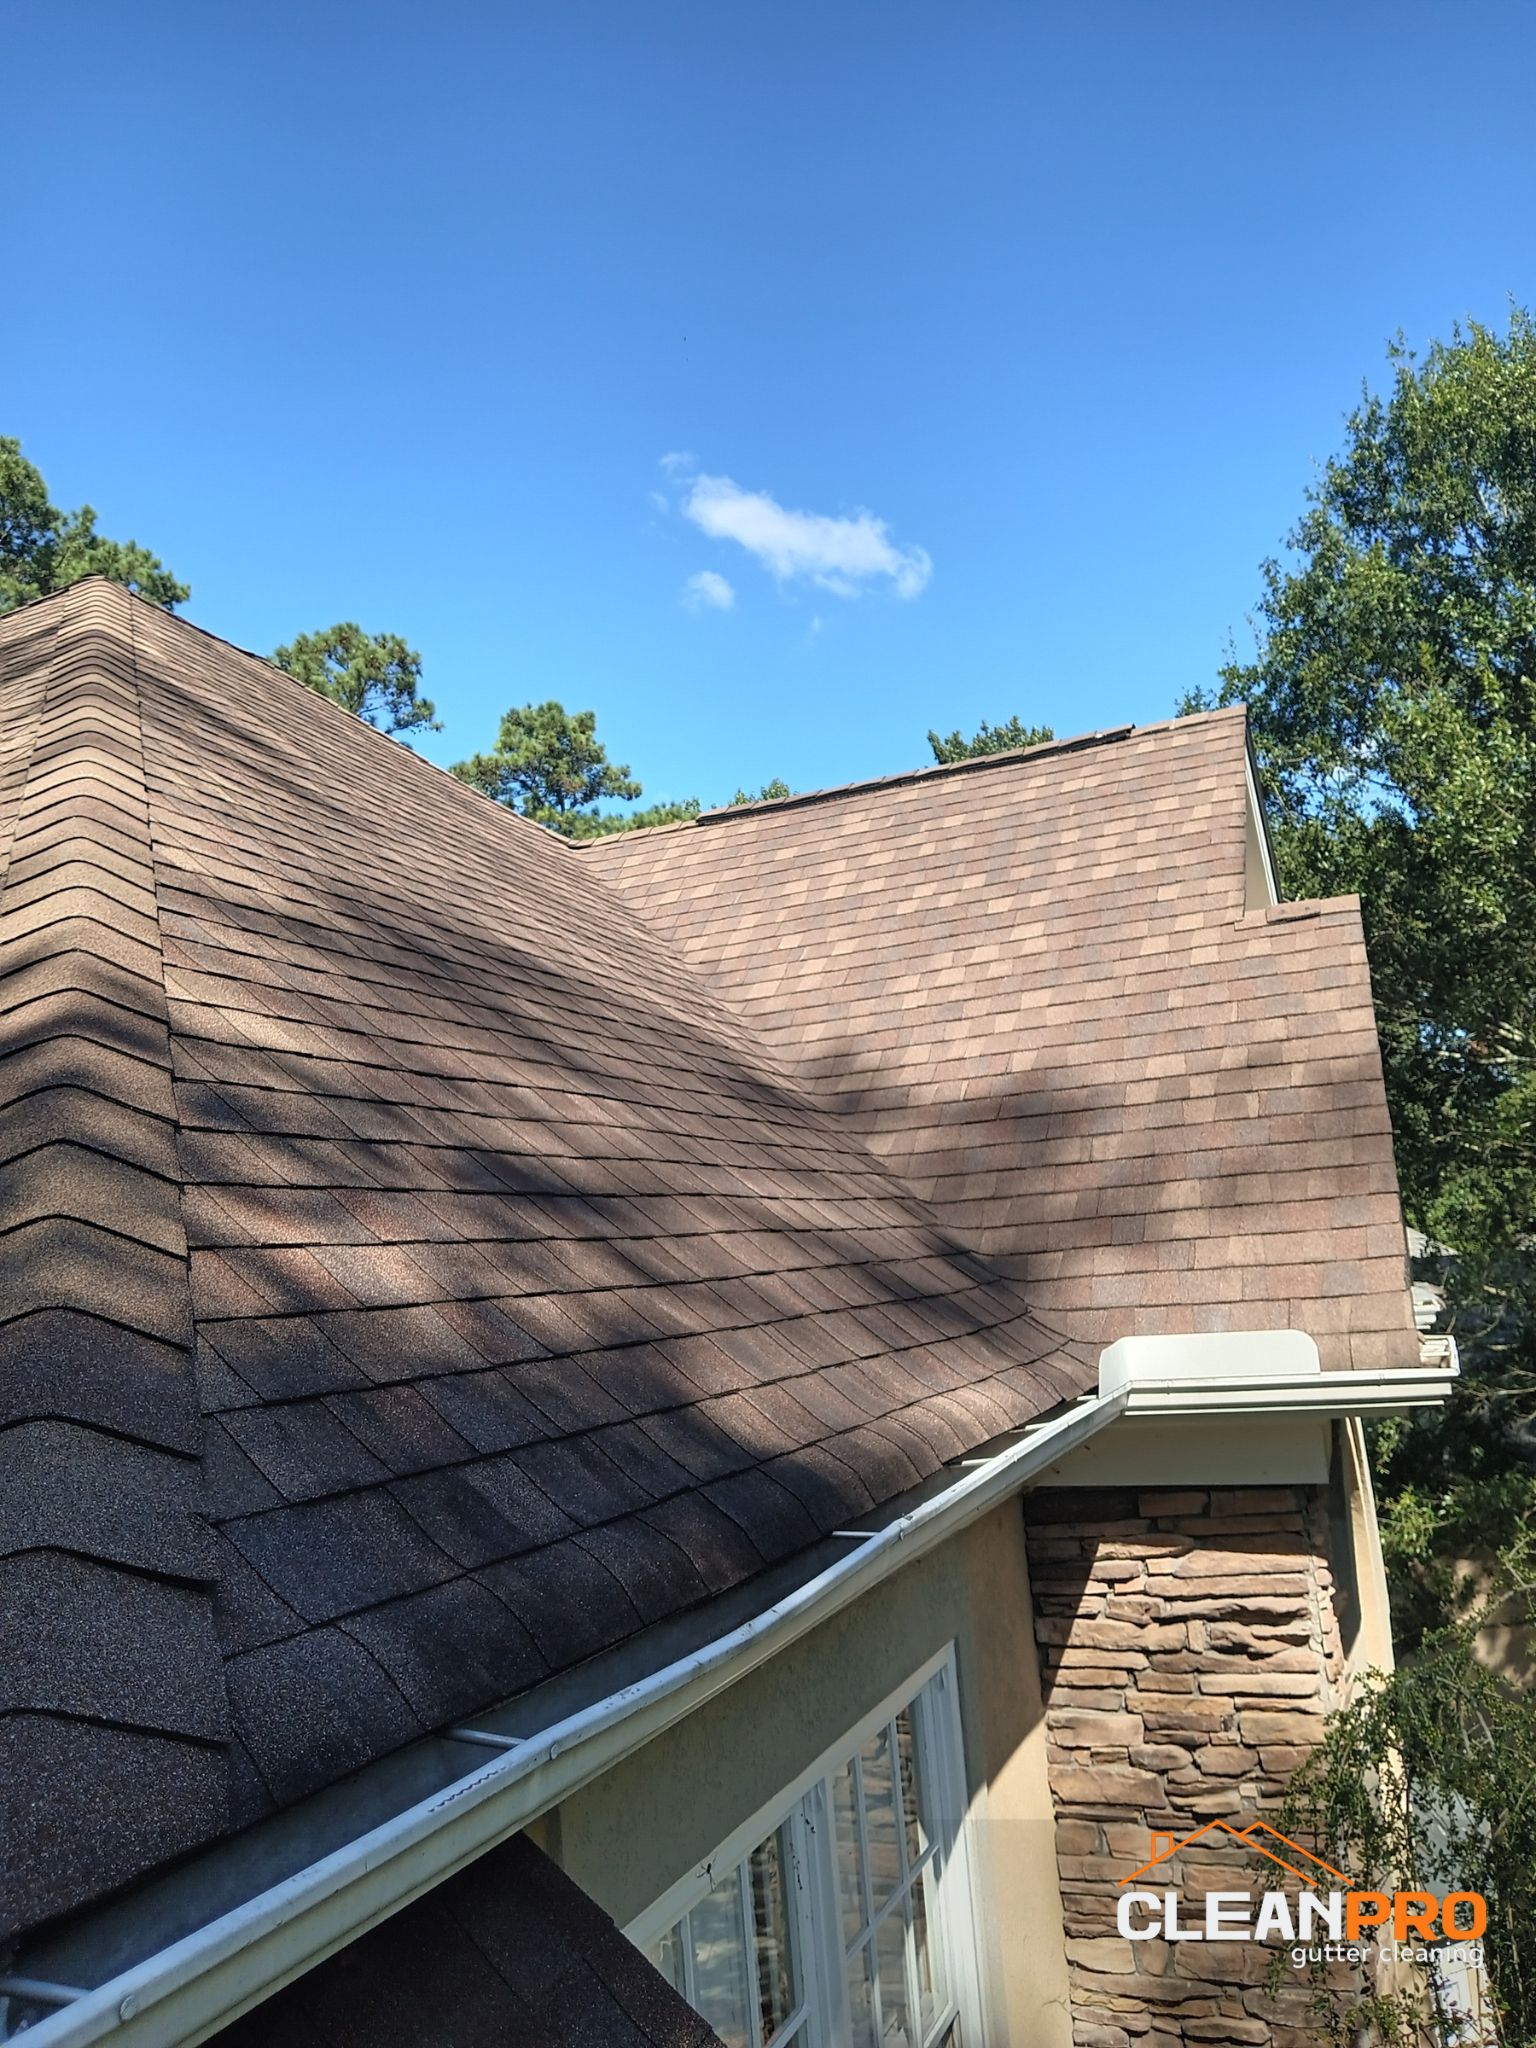 Quality Gutter Cleaning in Norfolk VA